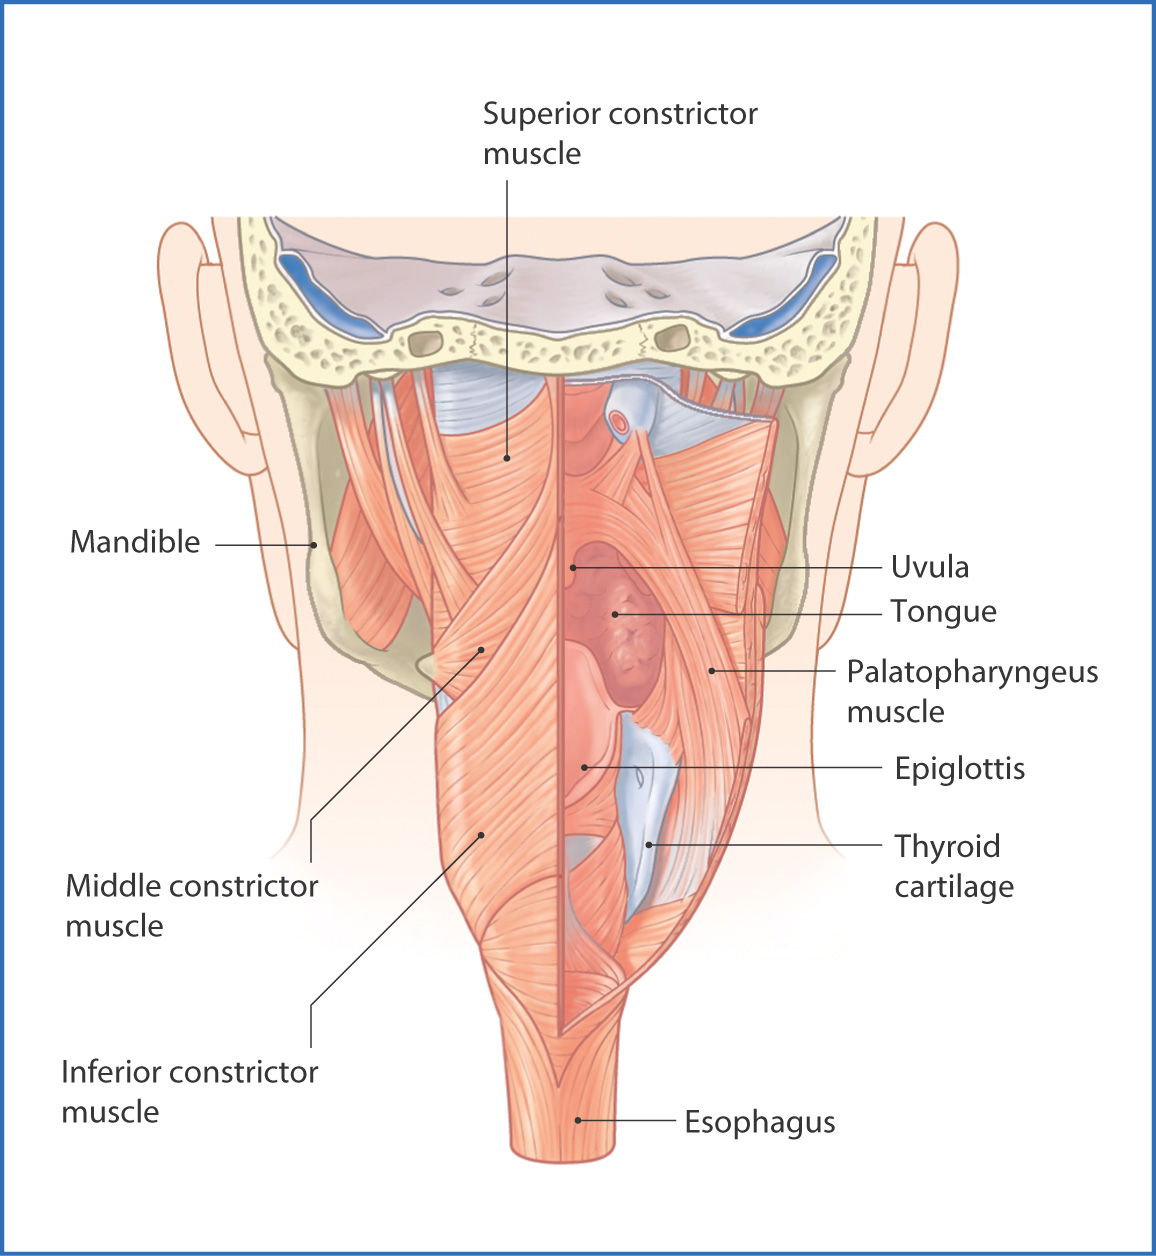 circular pharyngeal constrictor muscles